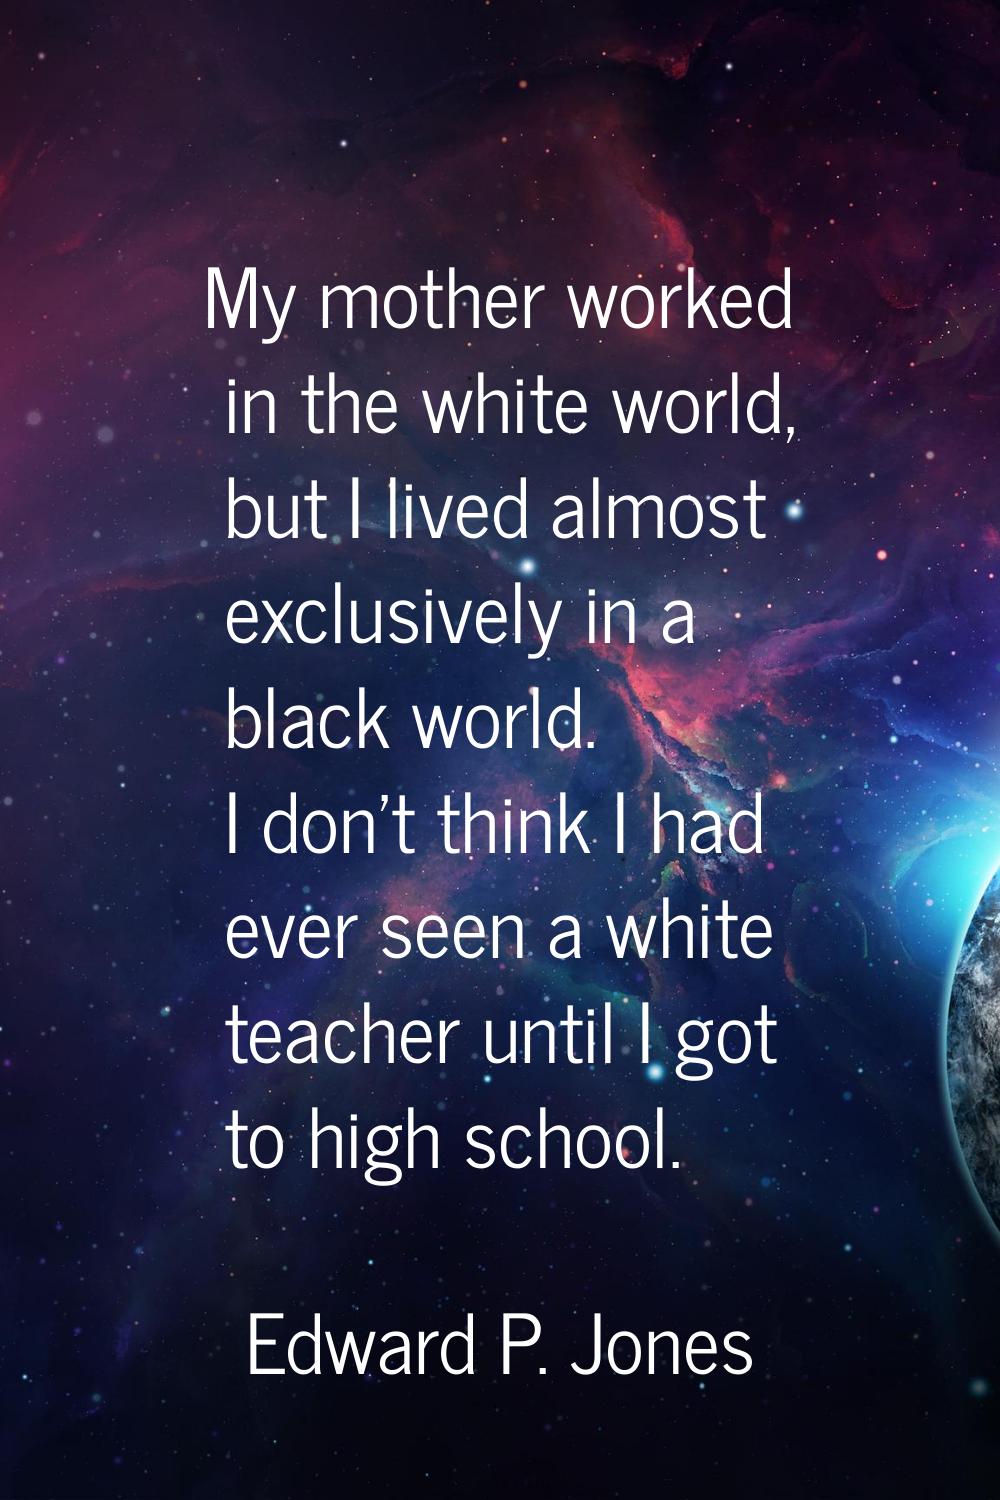 My mother worked in the white world, but I lived almost exclusively in a black world. I don't think